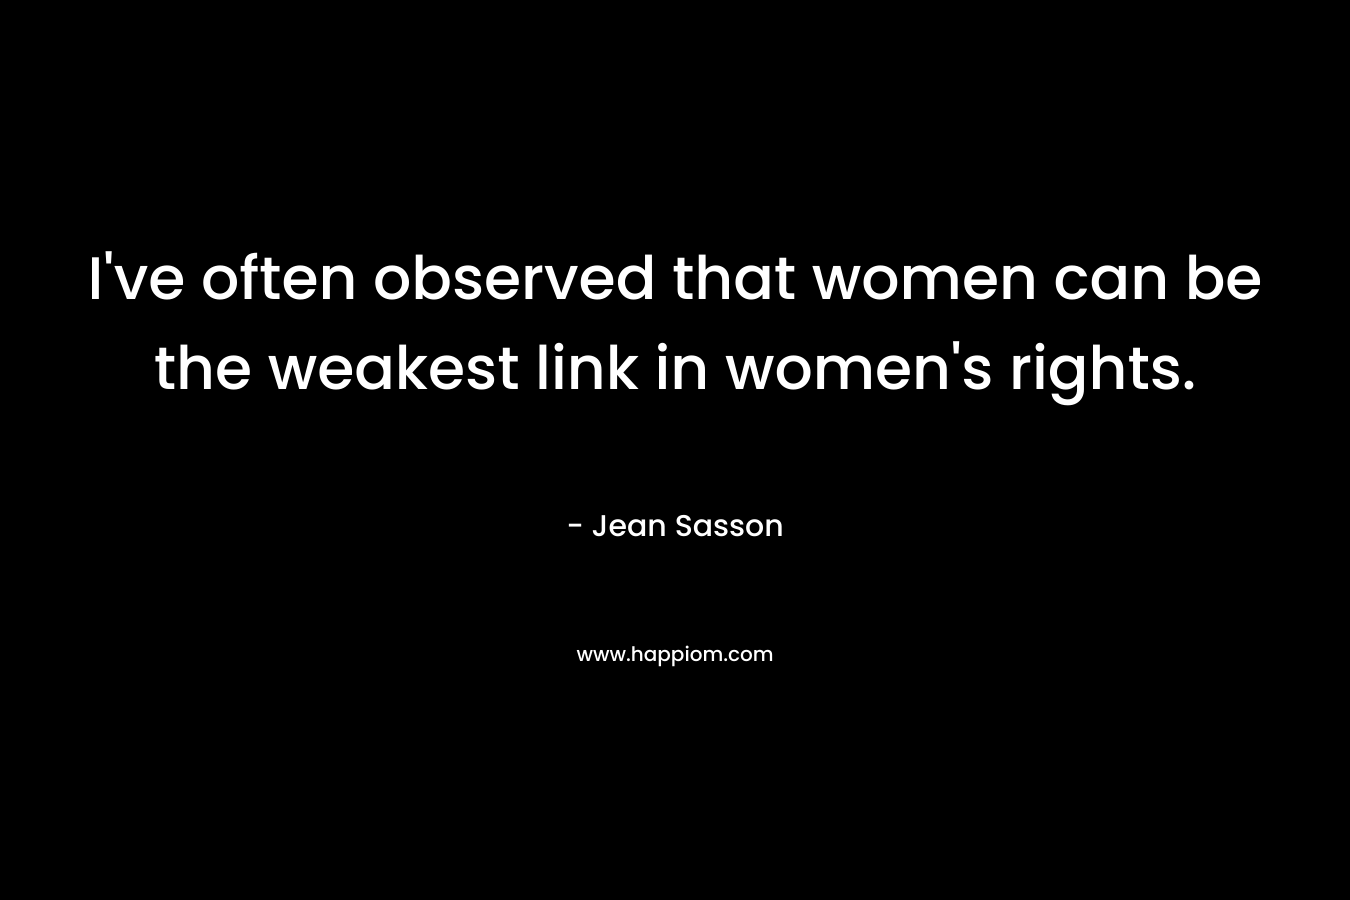 I've often observed that women can be the weakest link in women's rights.